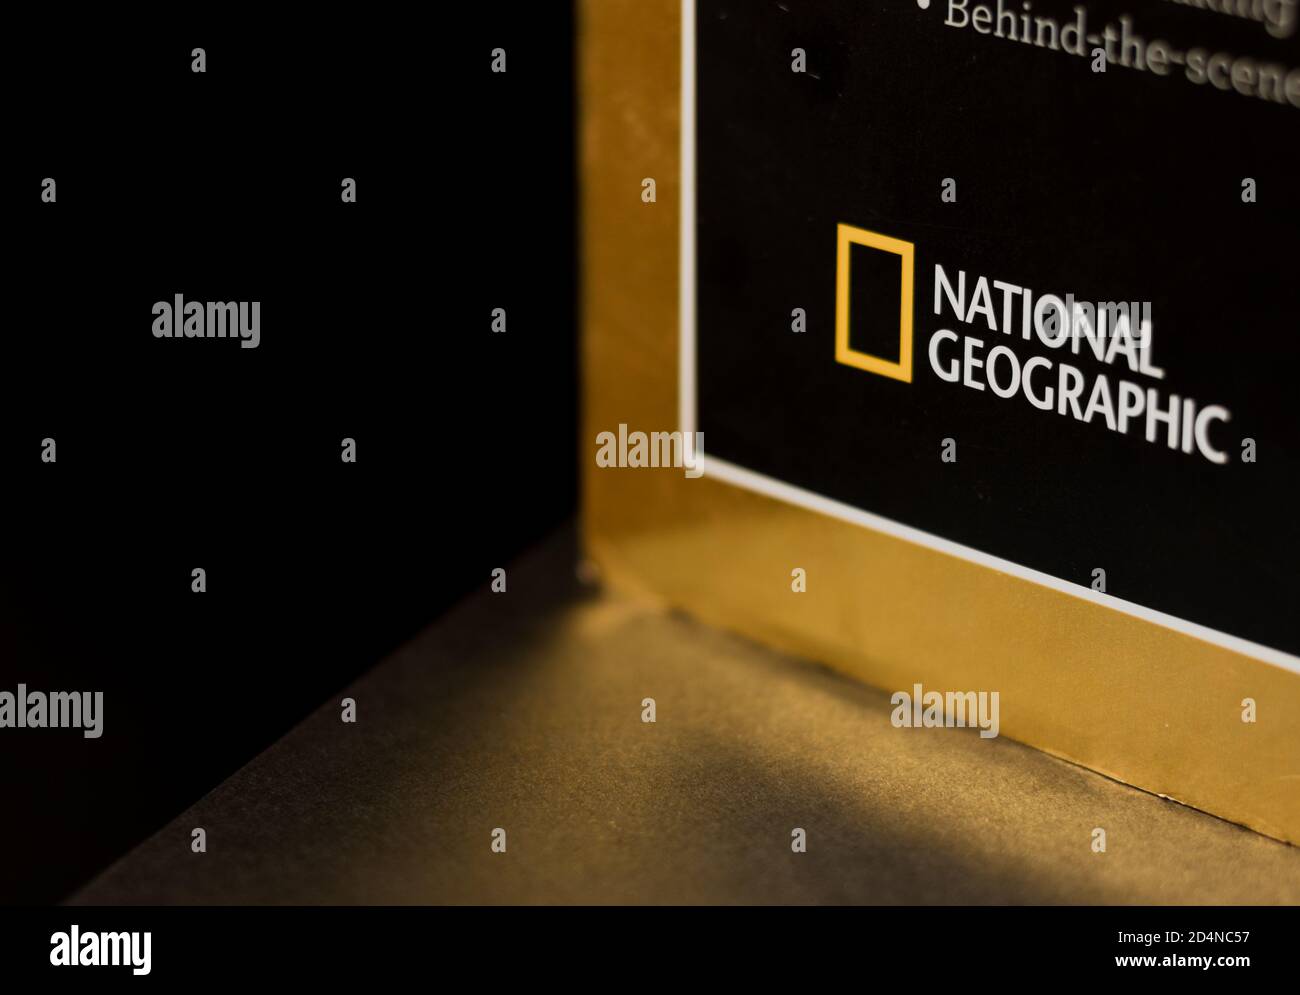 National Geographic logo on a book Stock Photo